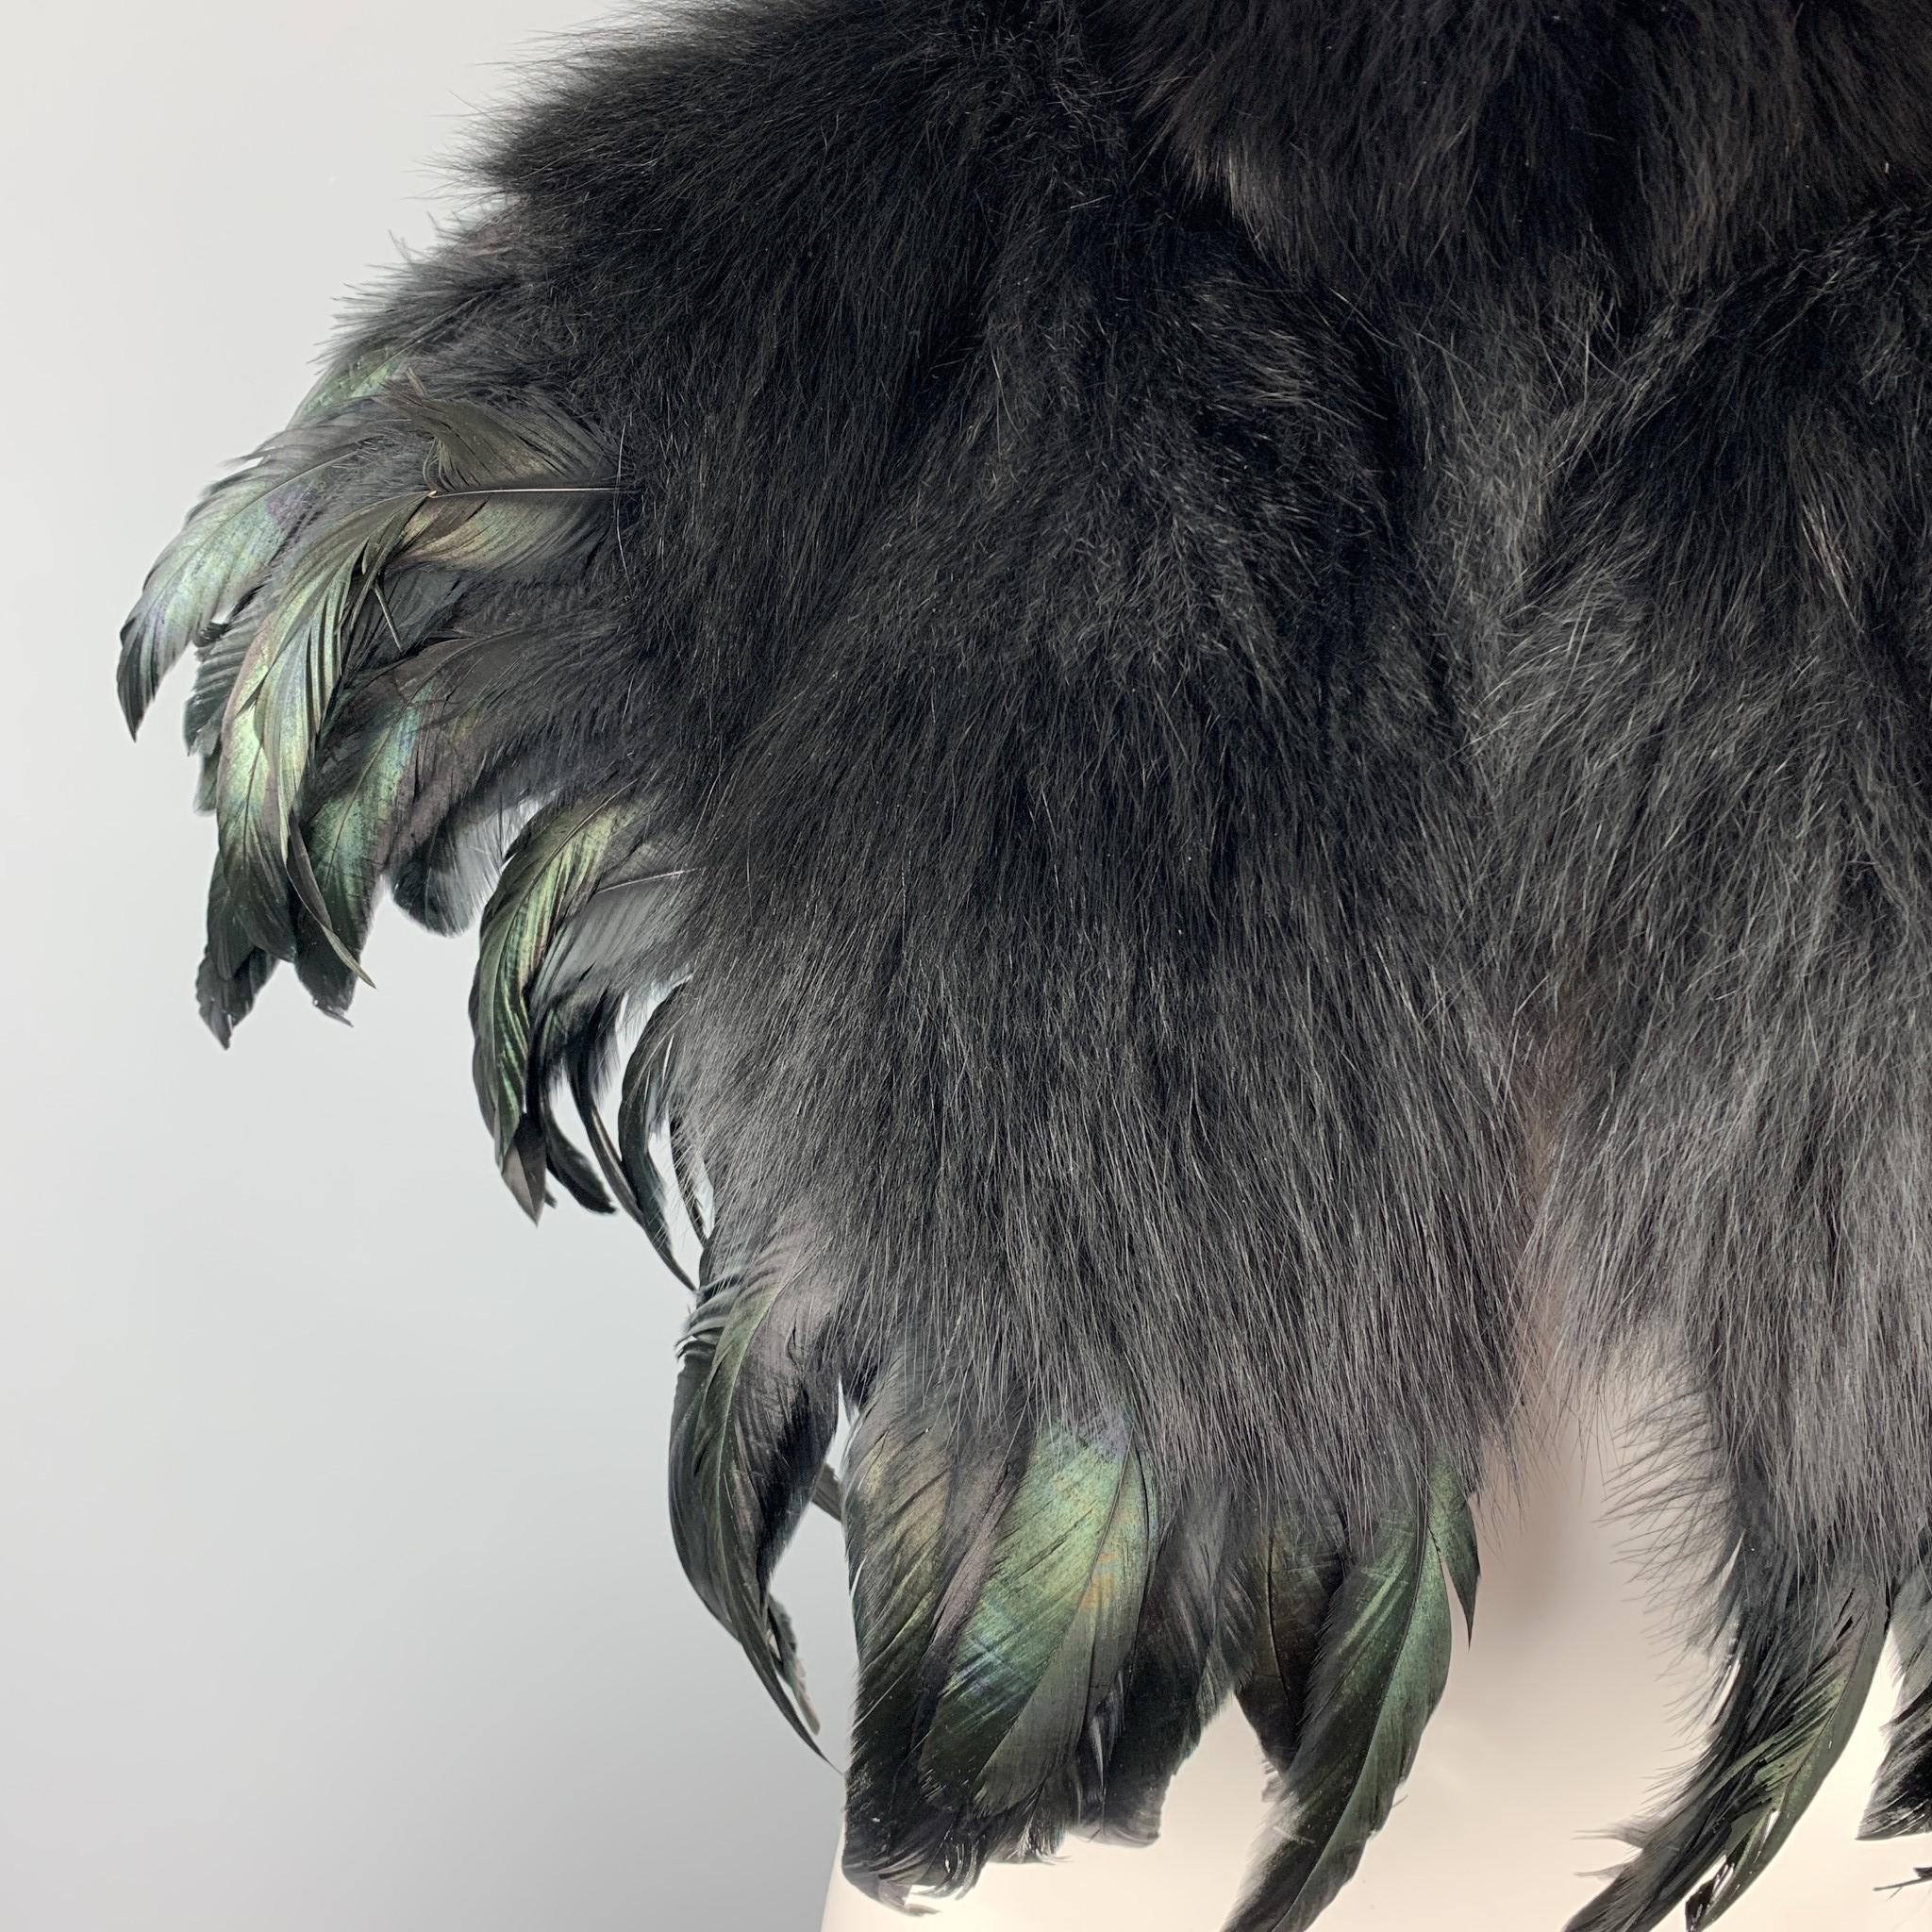 CO shawl comes in a black fox fur with green iridescent feathers featuring a black silk liner. 

Excellent Pre-Owned Condition.

Measurements:
Shoulder: 18 in. 
Length: 16 in. 

